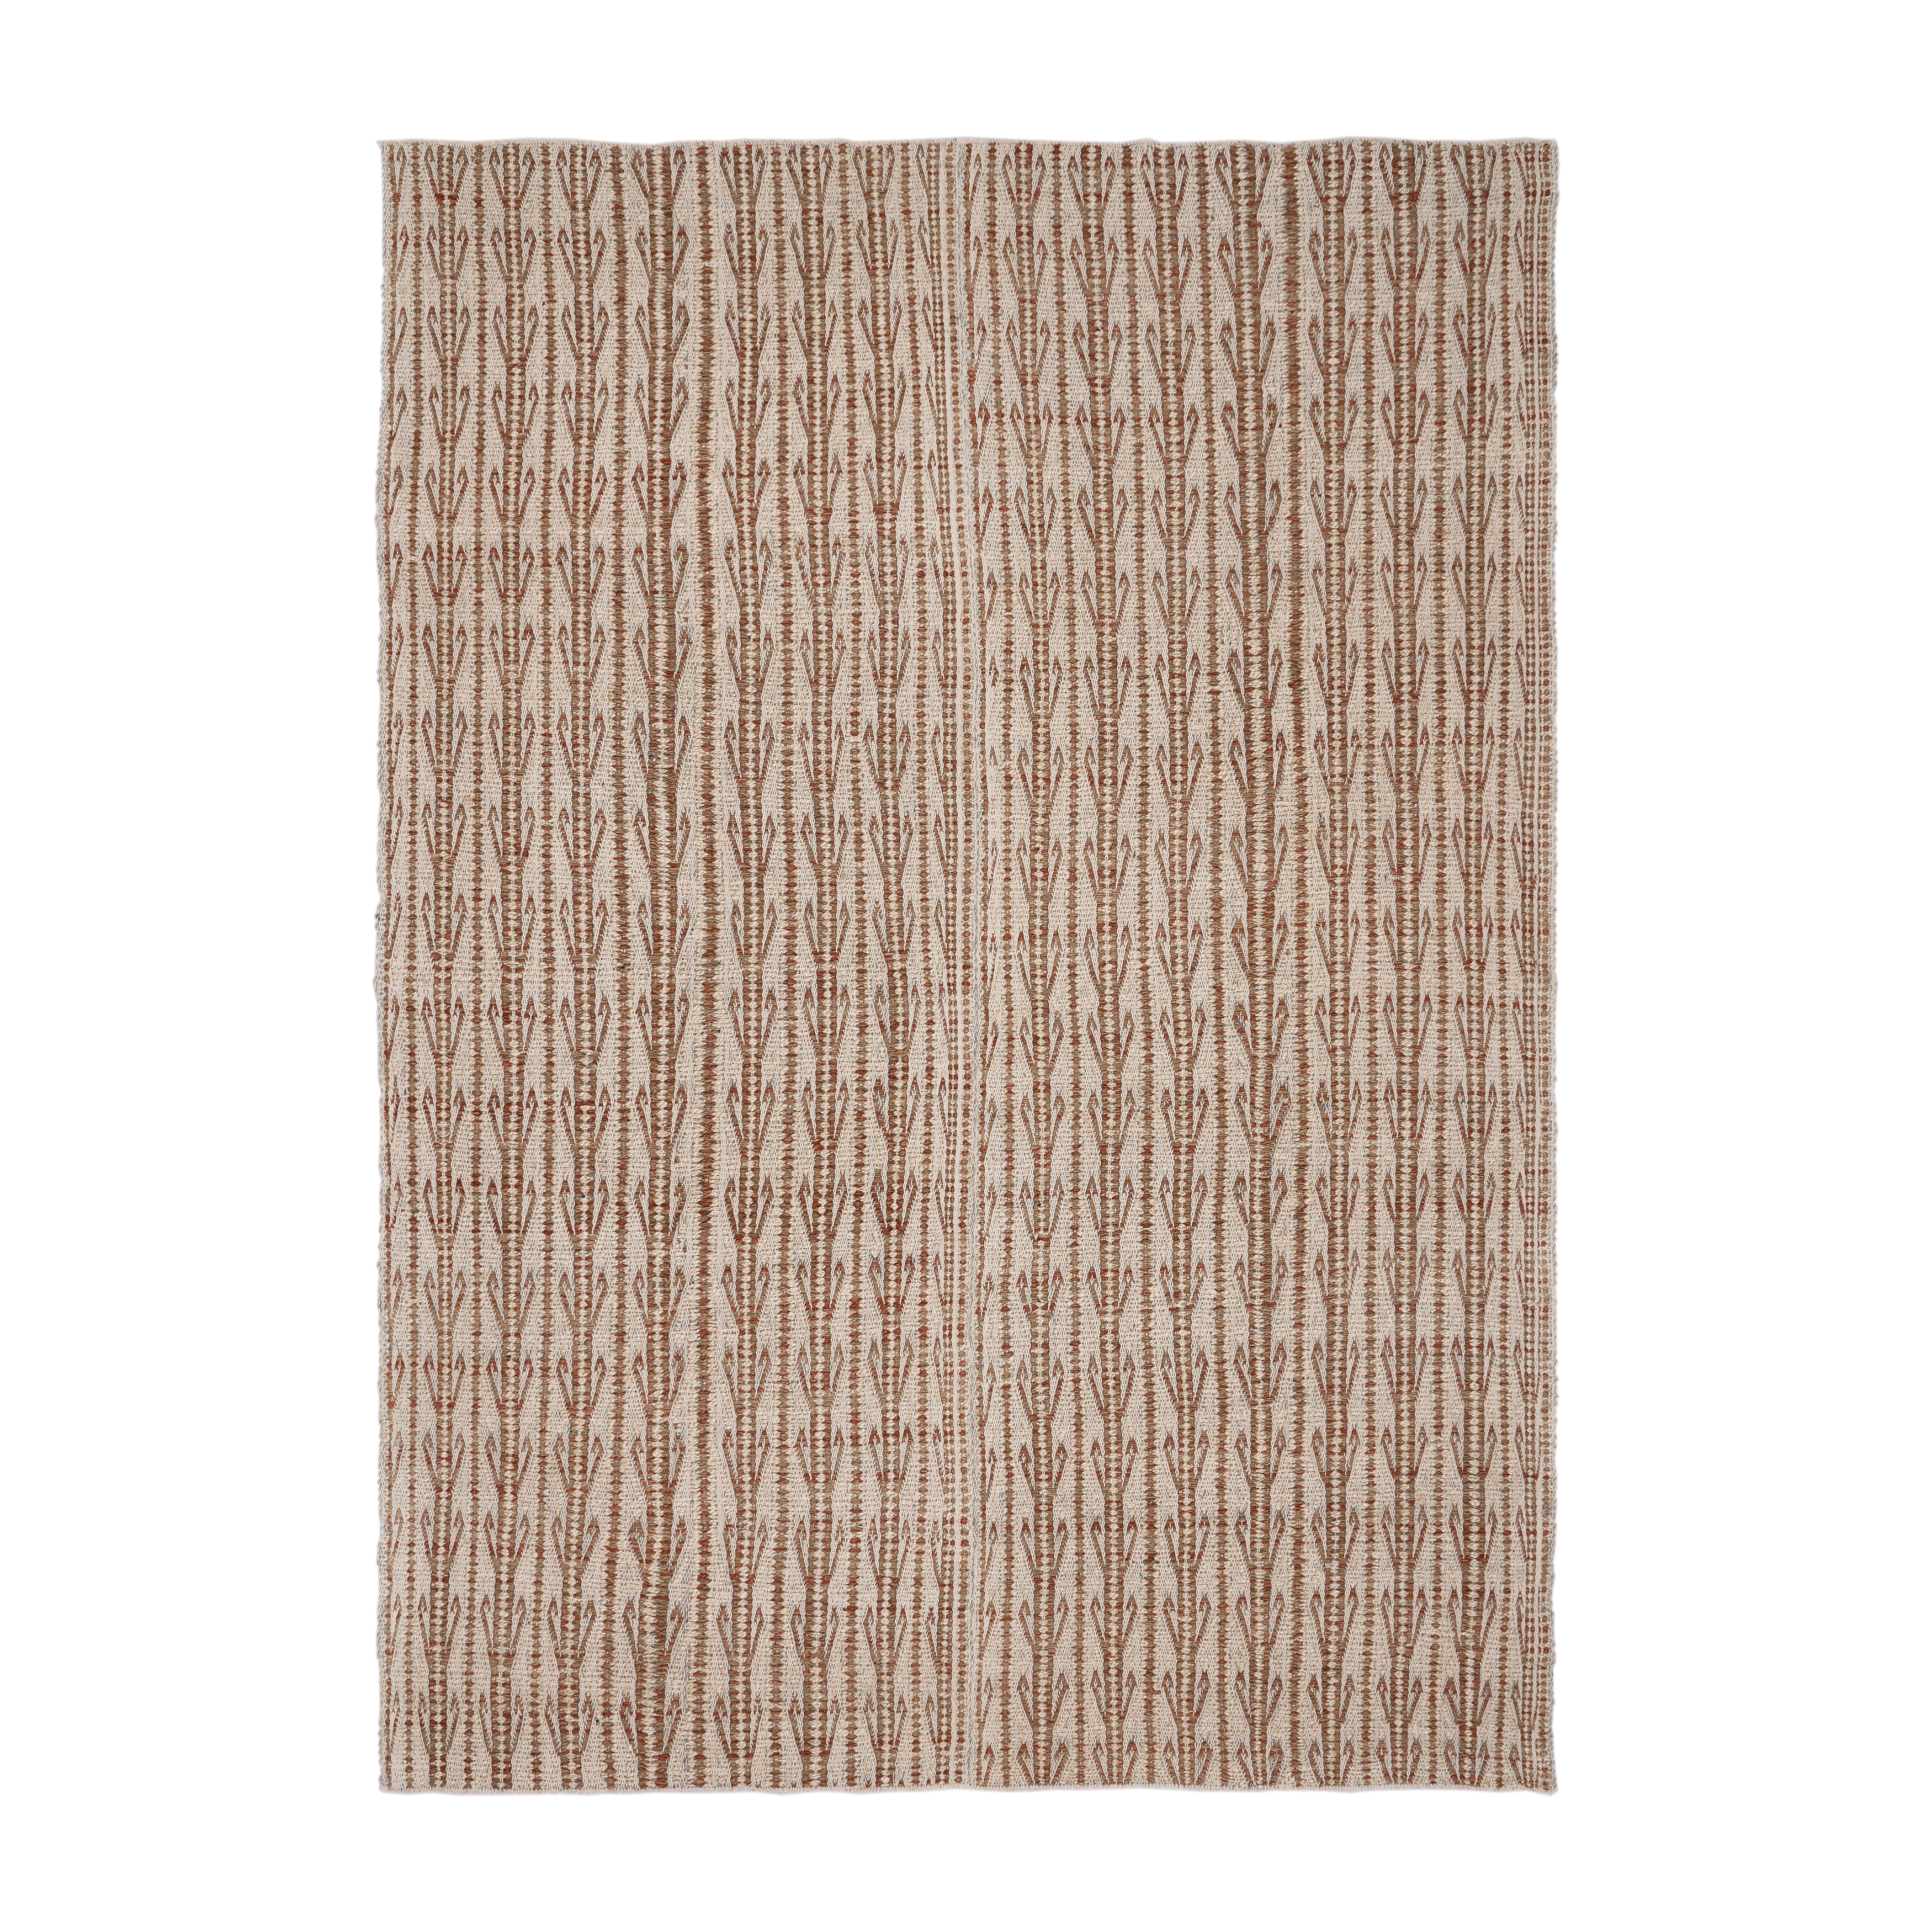 This Ricci flatweave rug is made with 100% handspun, Natural dye Persian wool. 